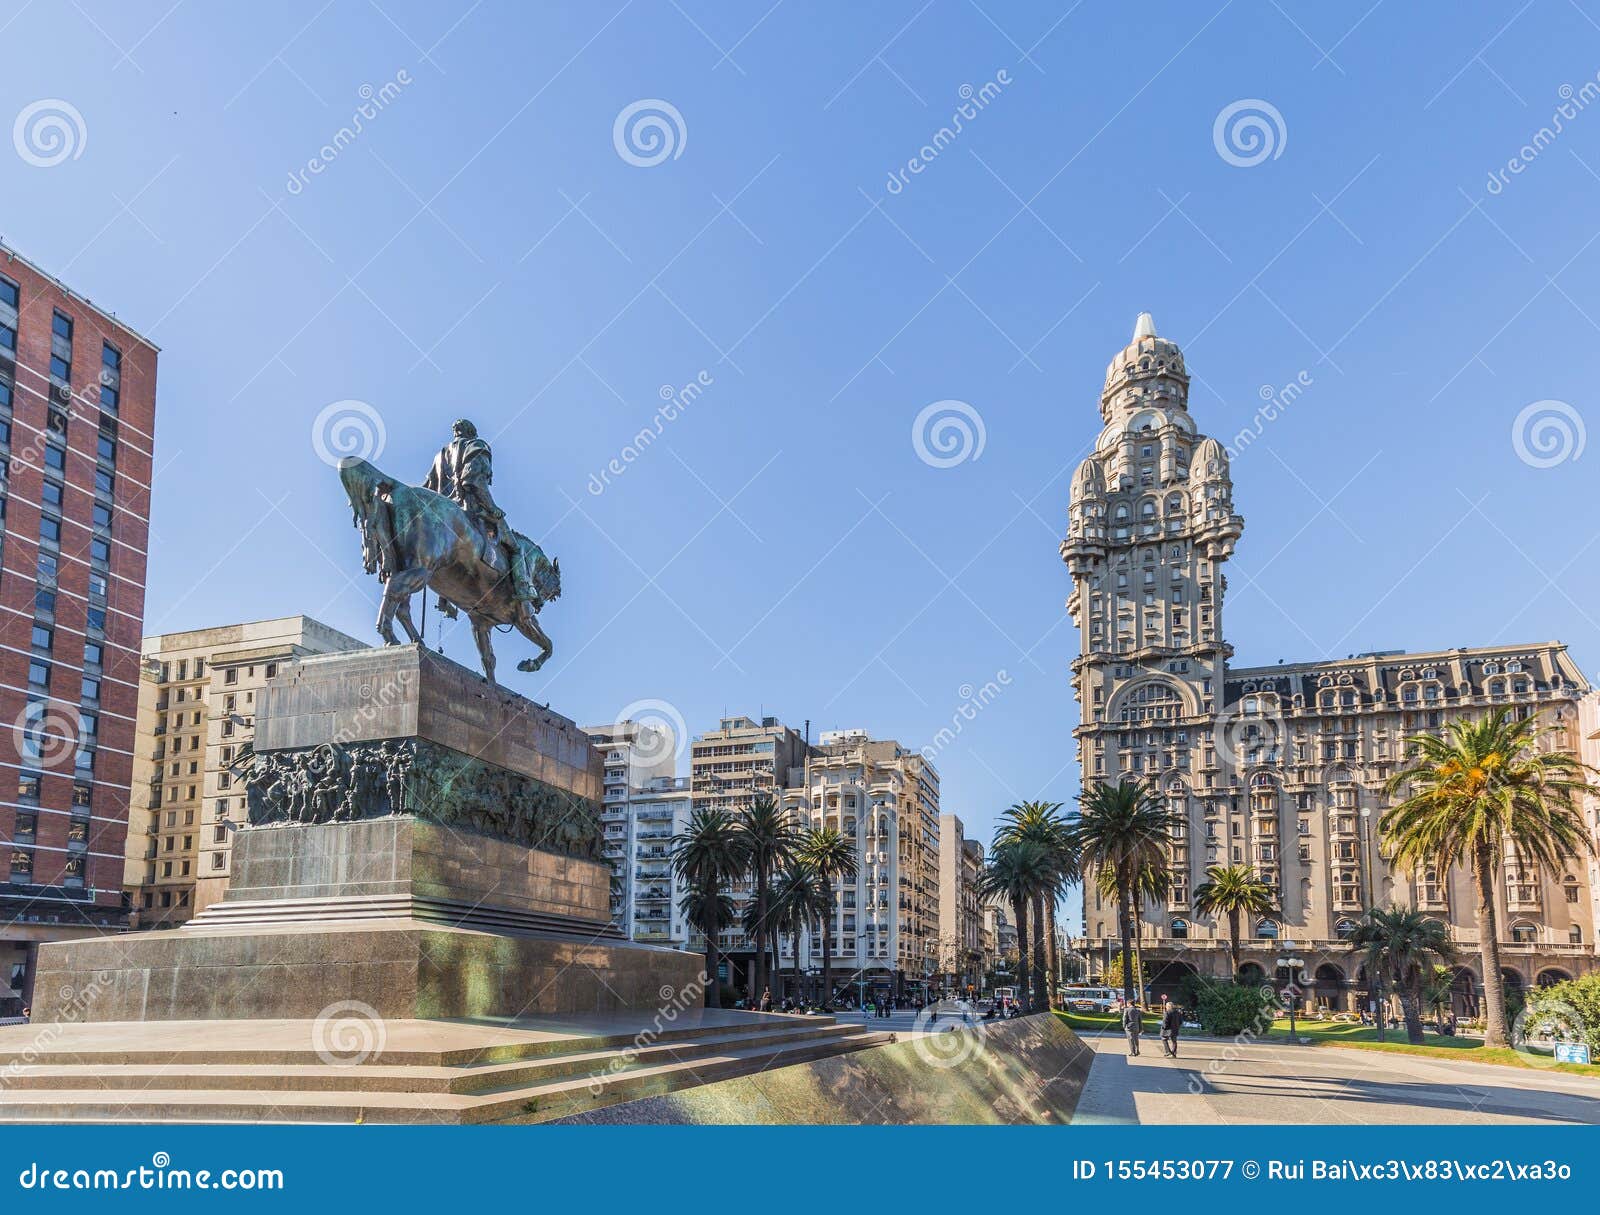 montevideo - july 02, 2017: palacio salvo in the center of the city of montevideo, uruguay